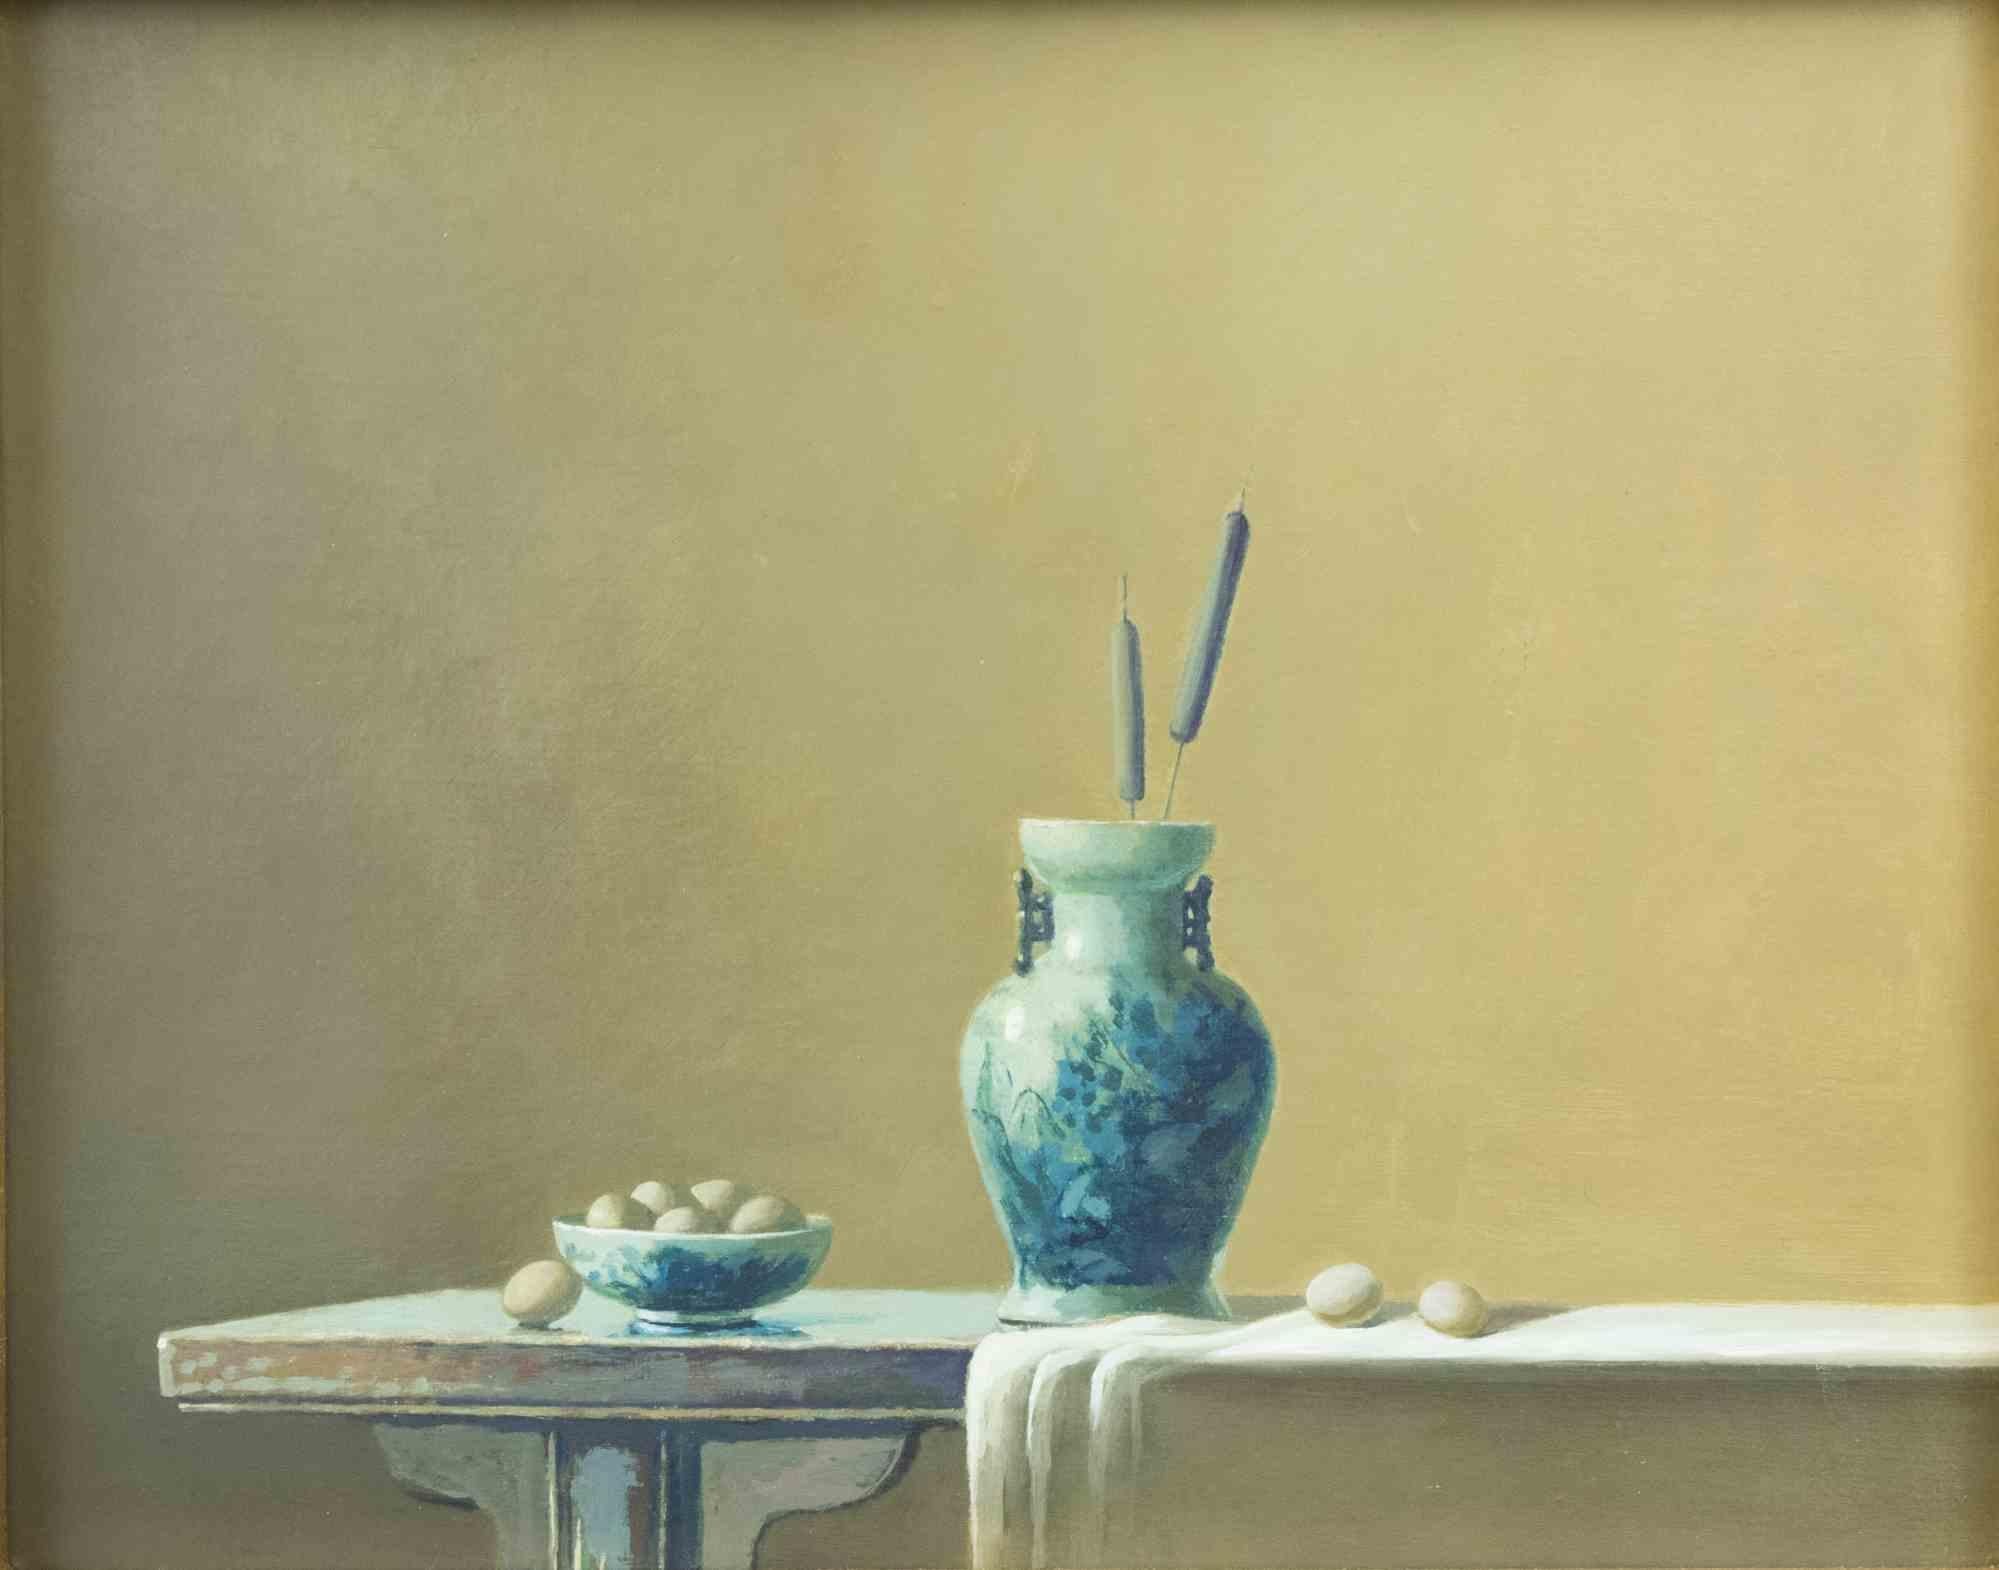 Vase and Eggs is an original oil painting realized  by Zhang Wei Guang (Mirror) in 2000s.

Includes frame.

Good conditions.

Zhang Wei Guang , also called ‘mirror' was born in Helong Jang, China in 1968. Having made a deep formative research about